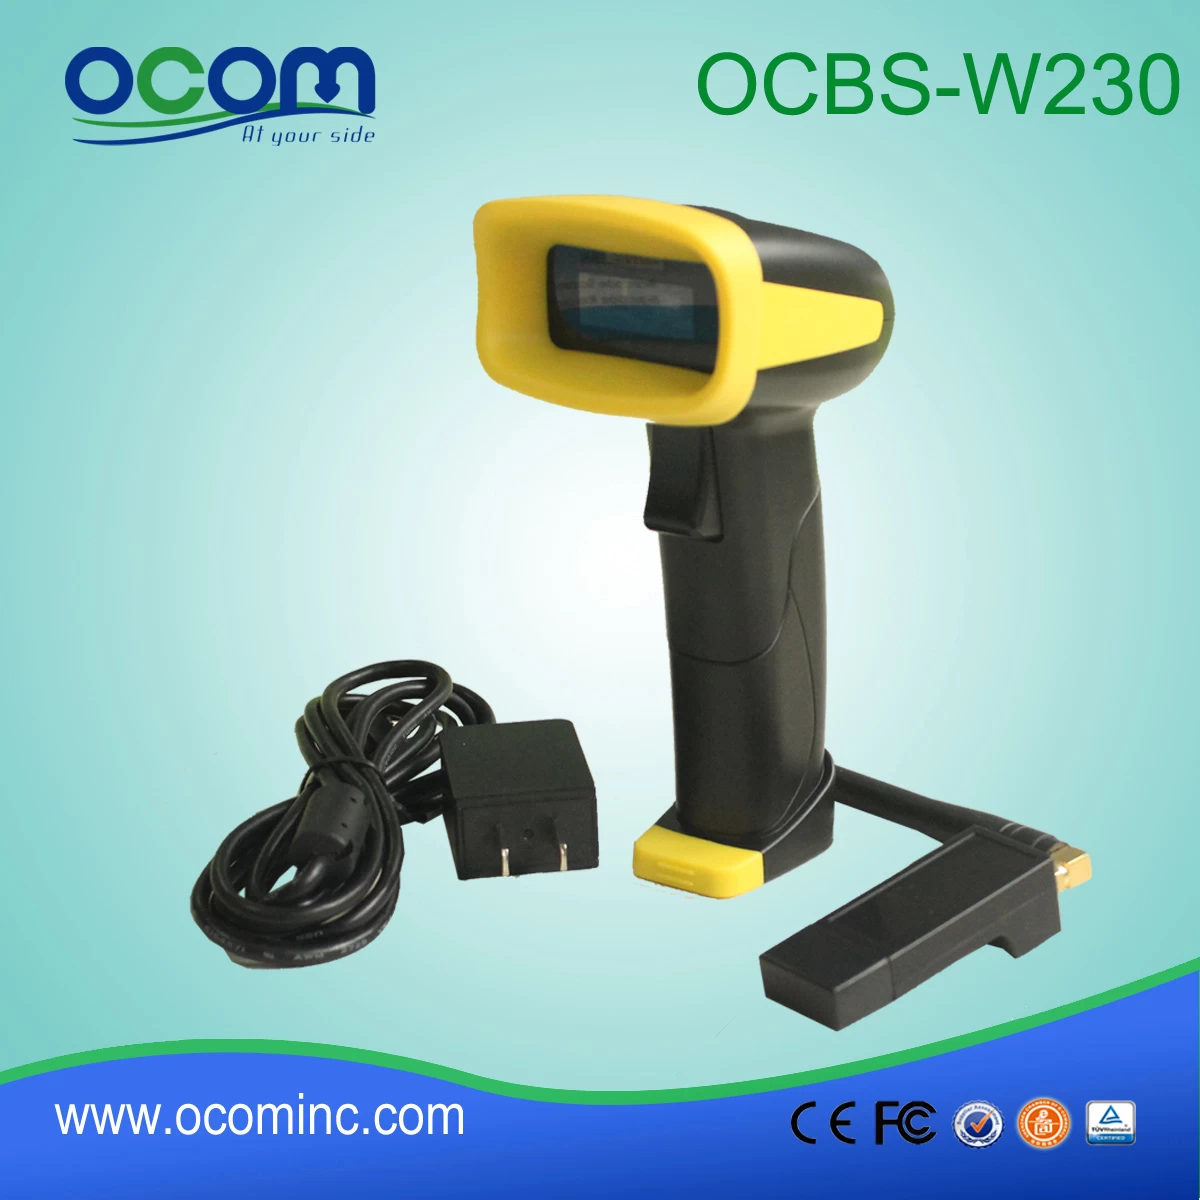 2D Barcode Scanner with 433MHz Wireless Communication